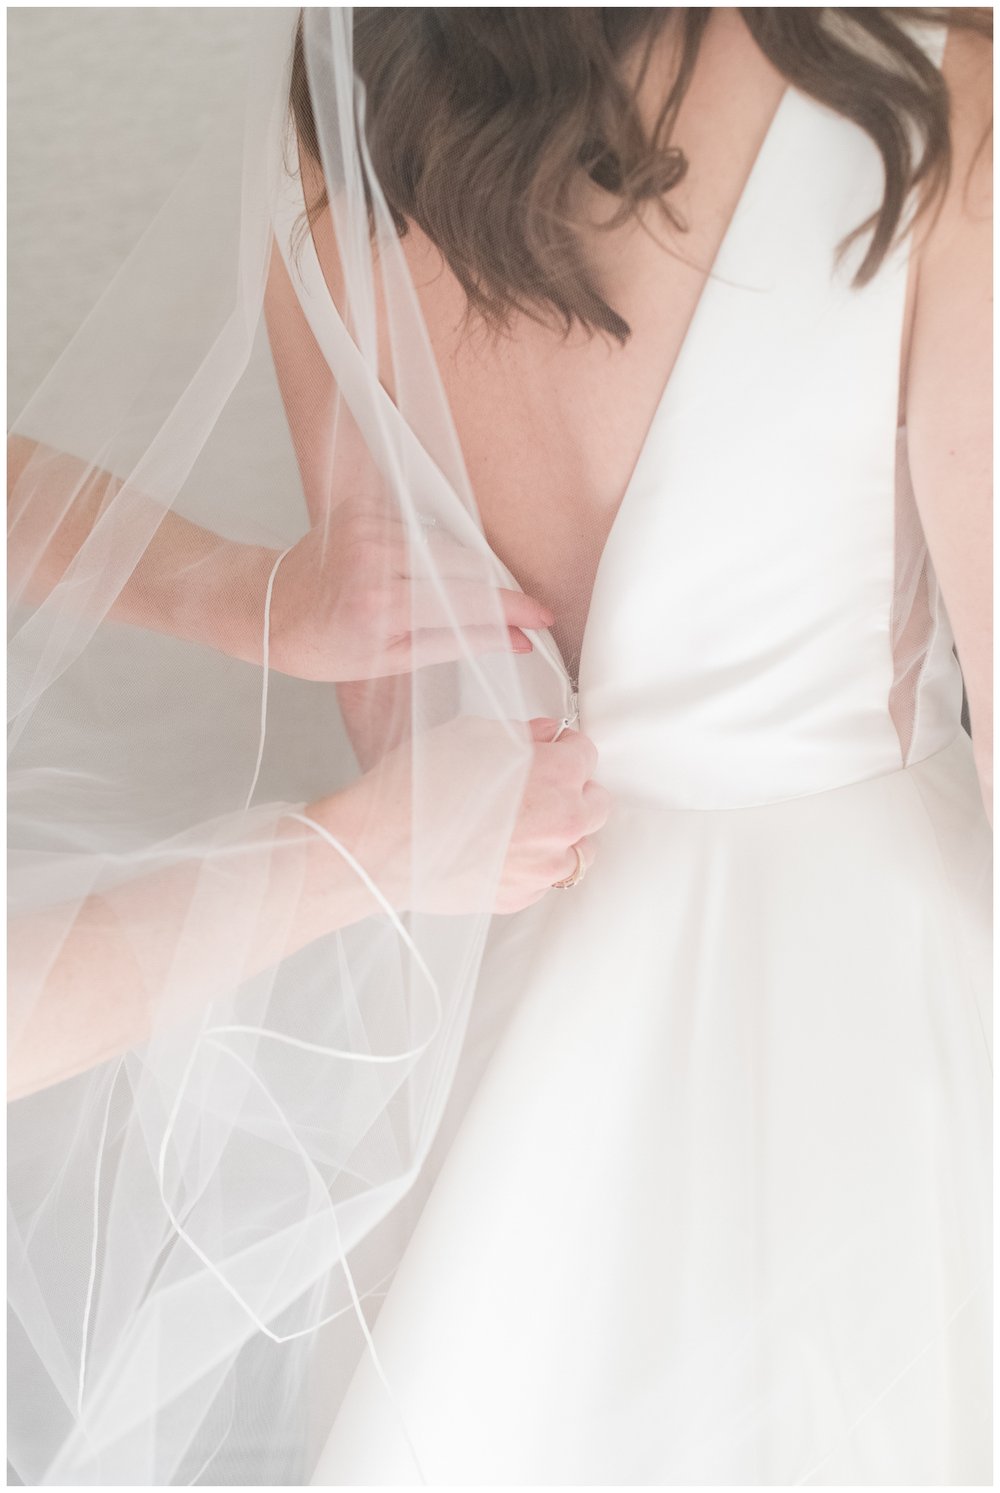 detail image of hands clasping back of white wedding gown Boston wedding photographer